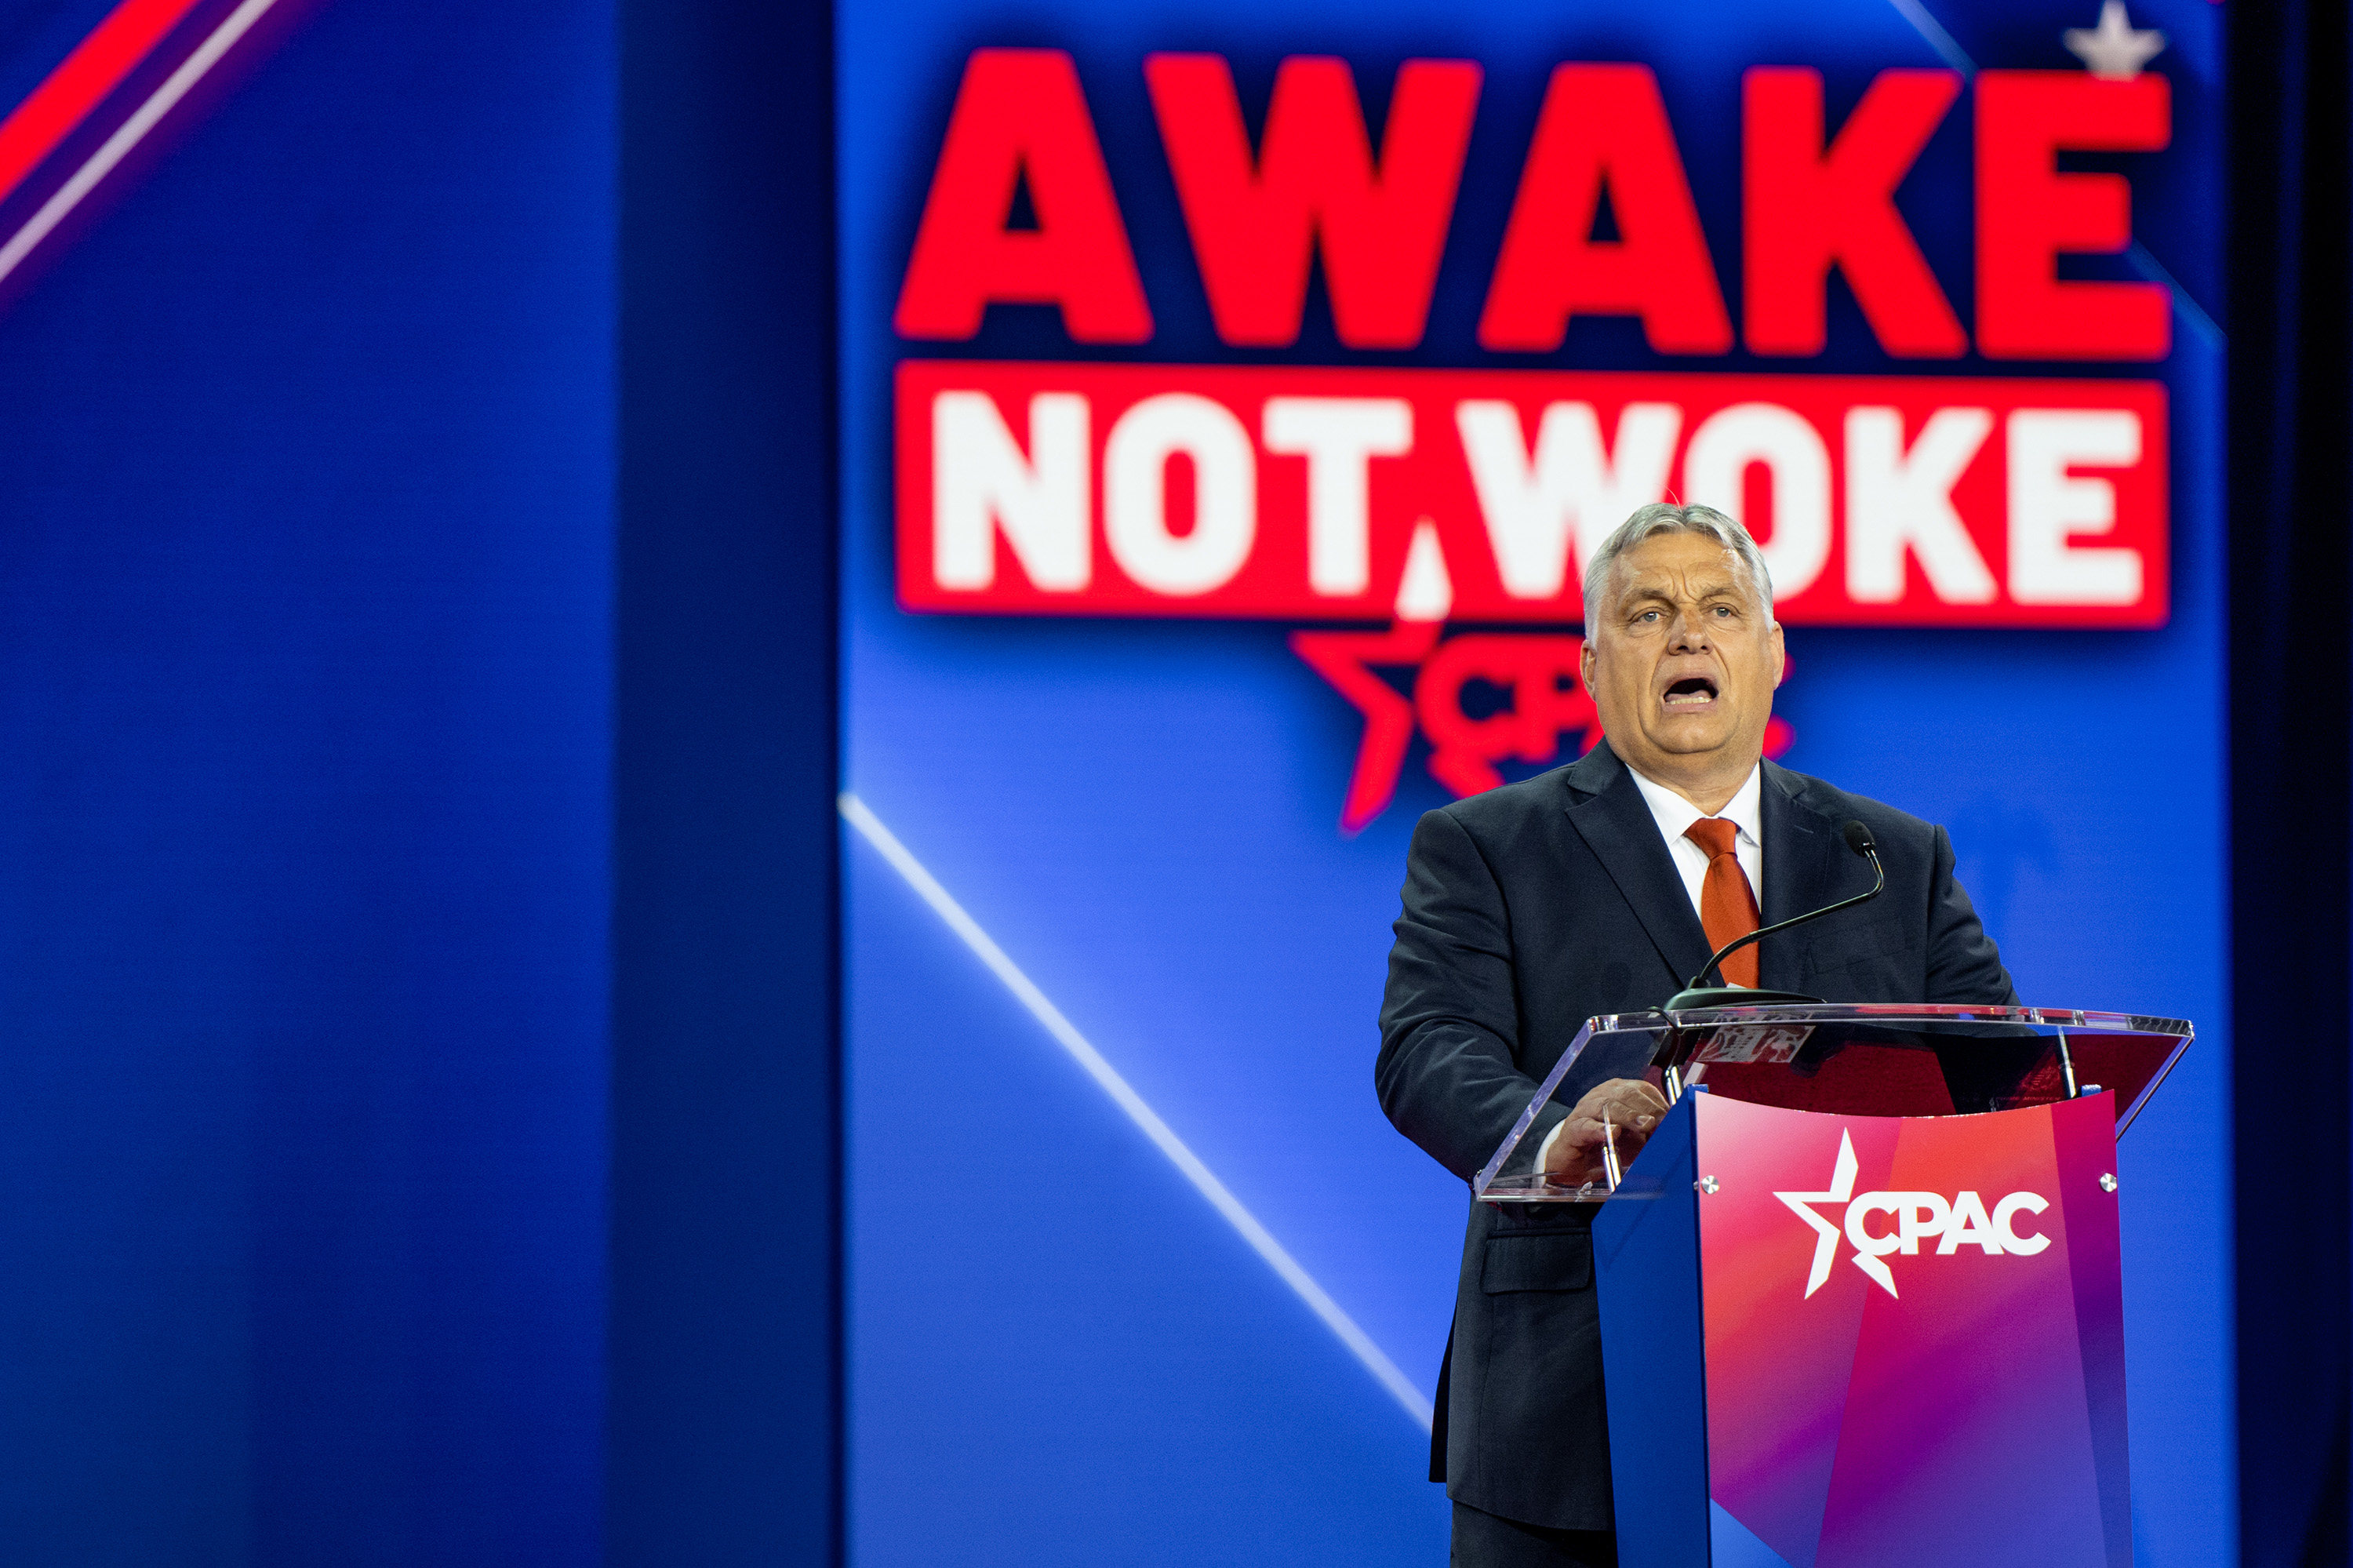 Hungarian Prime Minister Viktor Orban speaks at the Conservative Political Action Conference in Dallas on August 4. Hungary’s State Audit Office, which issued the “pink education” report, is seen as being close to Orban. Photo: TNS